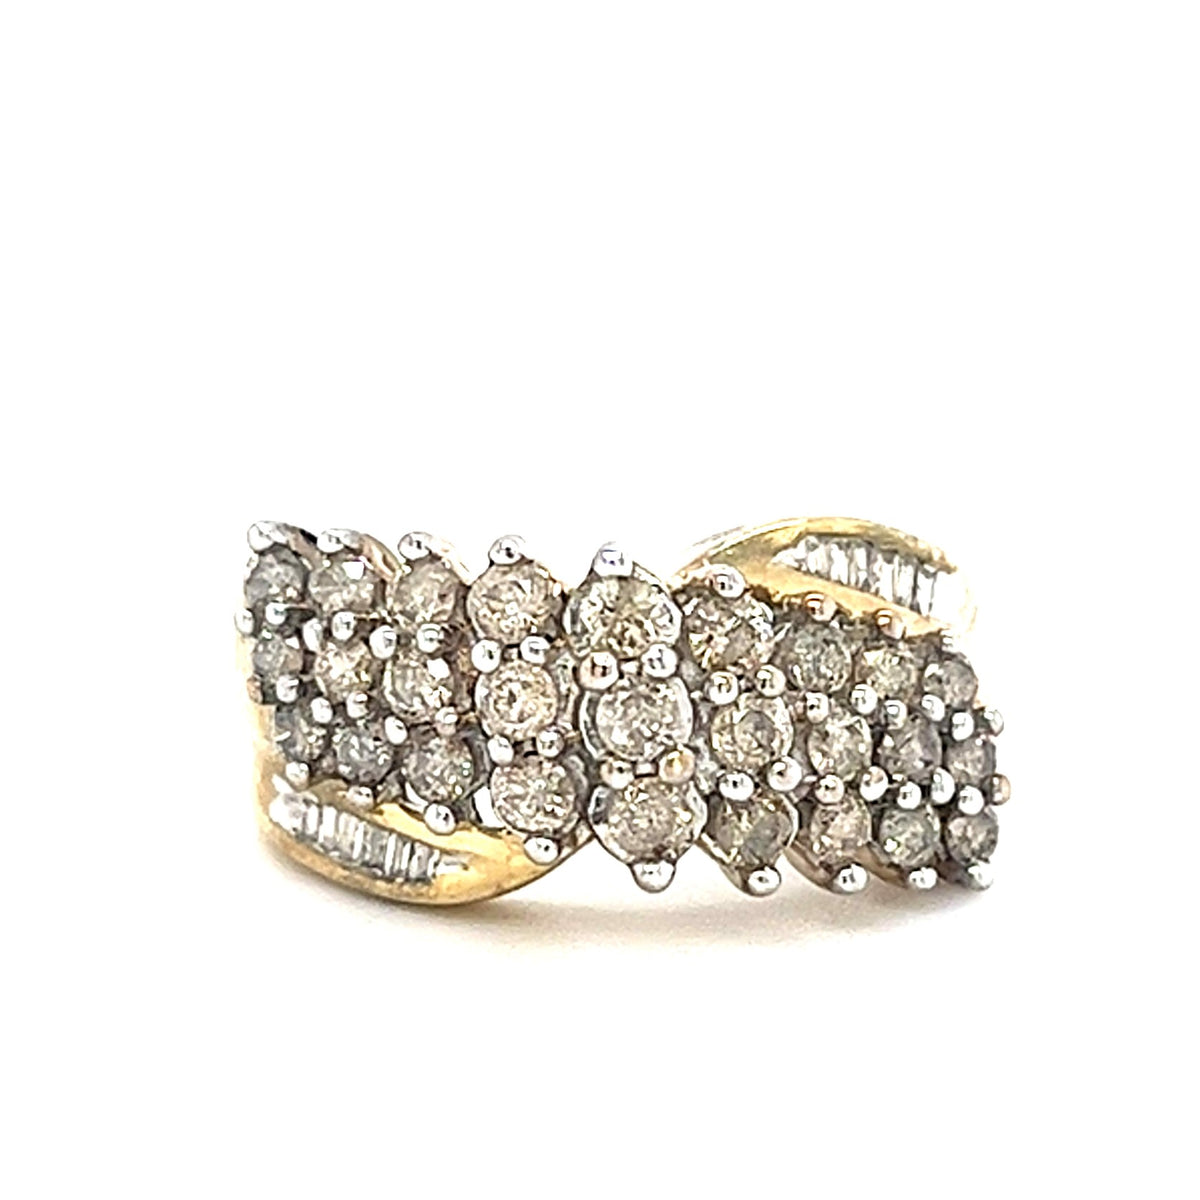 10KT YELLOW GOLD WITH DIAMONDS RING